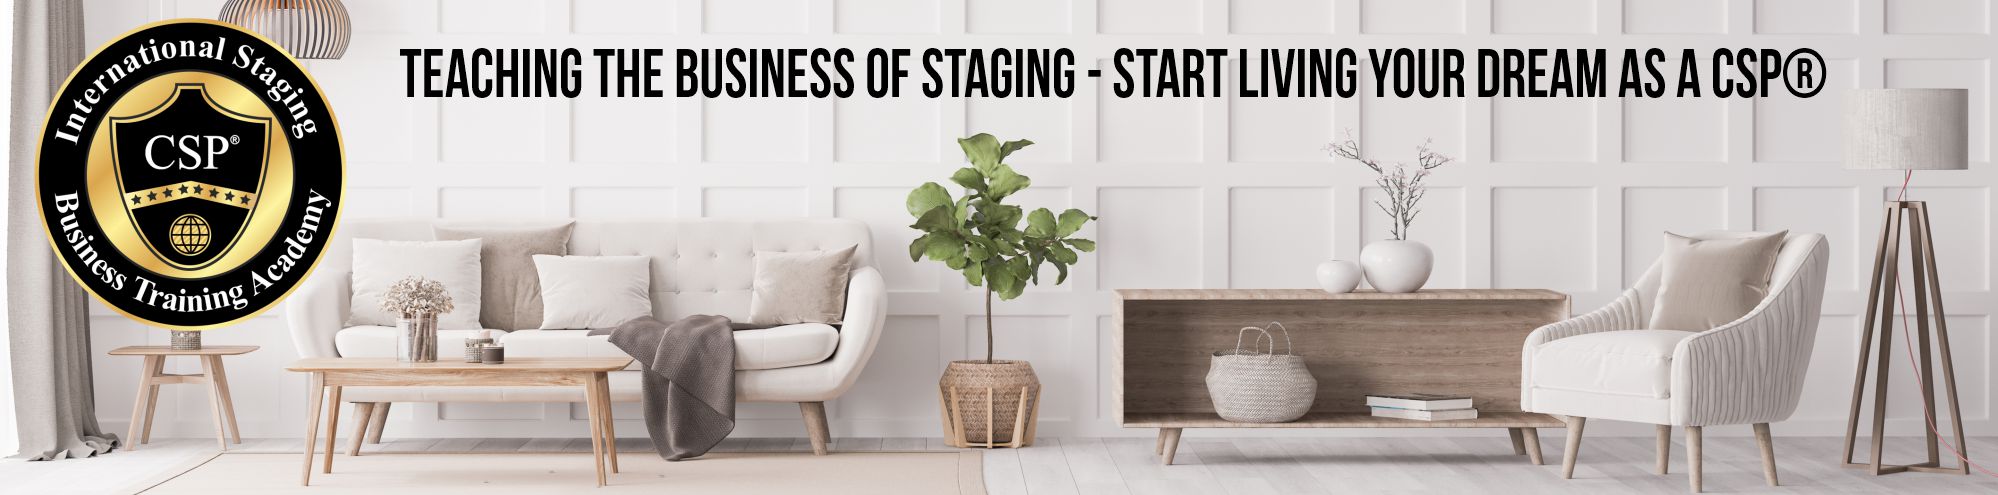 teaching the business of home staging